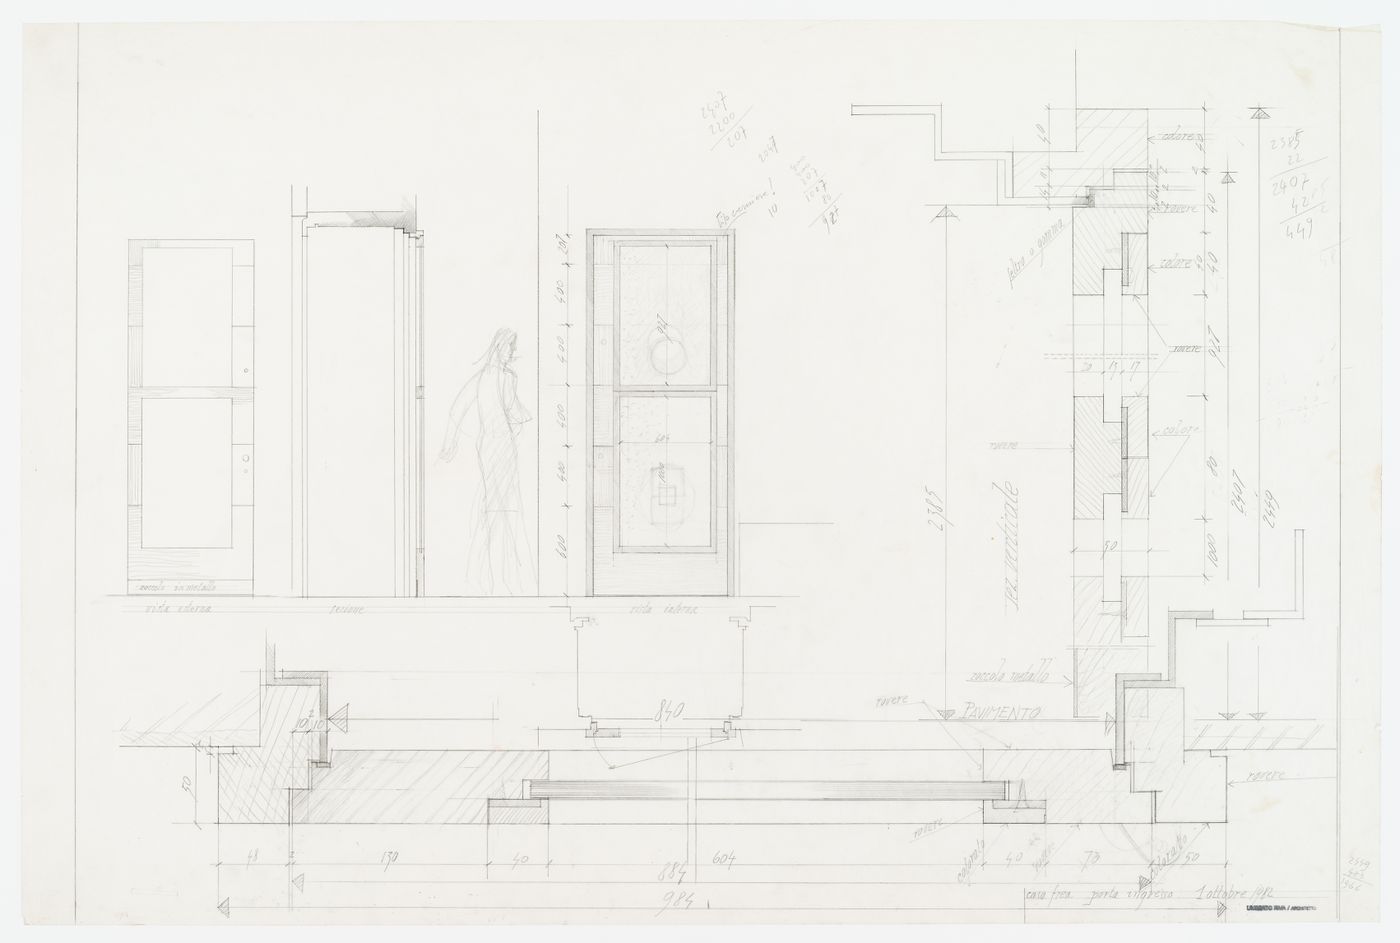 Elevation, section and plan of the entry door for Casa Frea, Milan, Italy